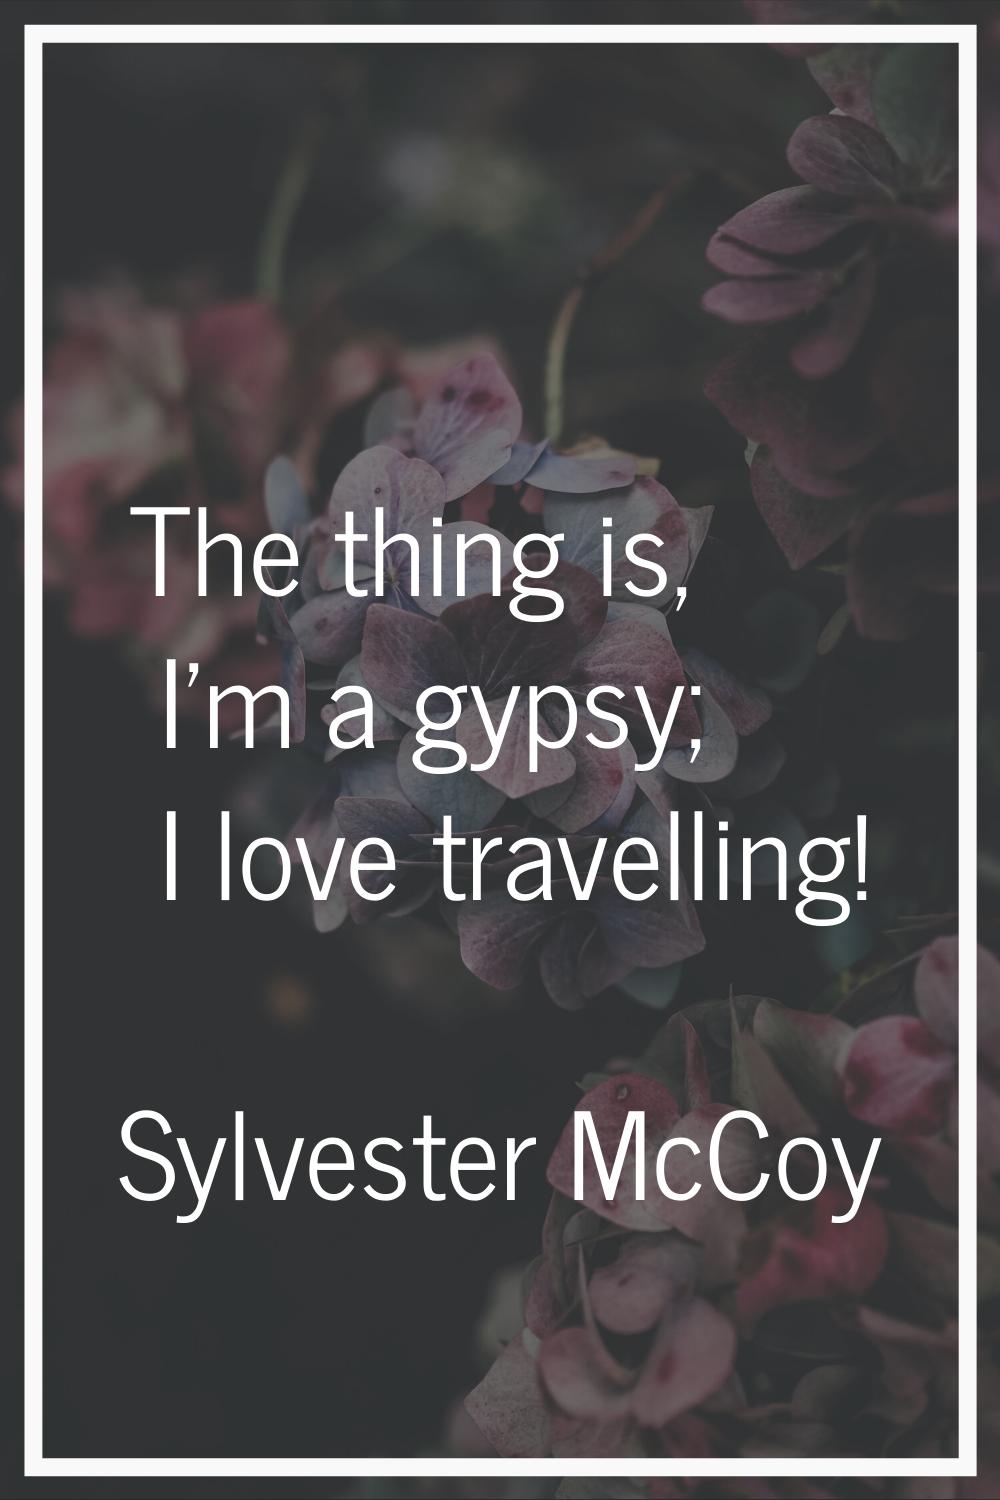 The thing is, I'm a gypsy; I love travelling!